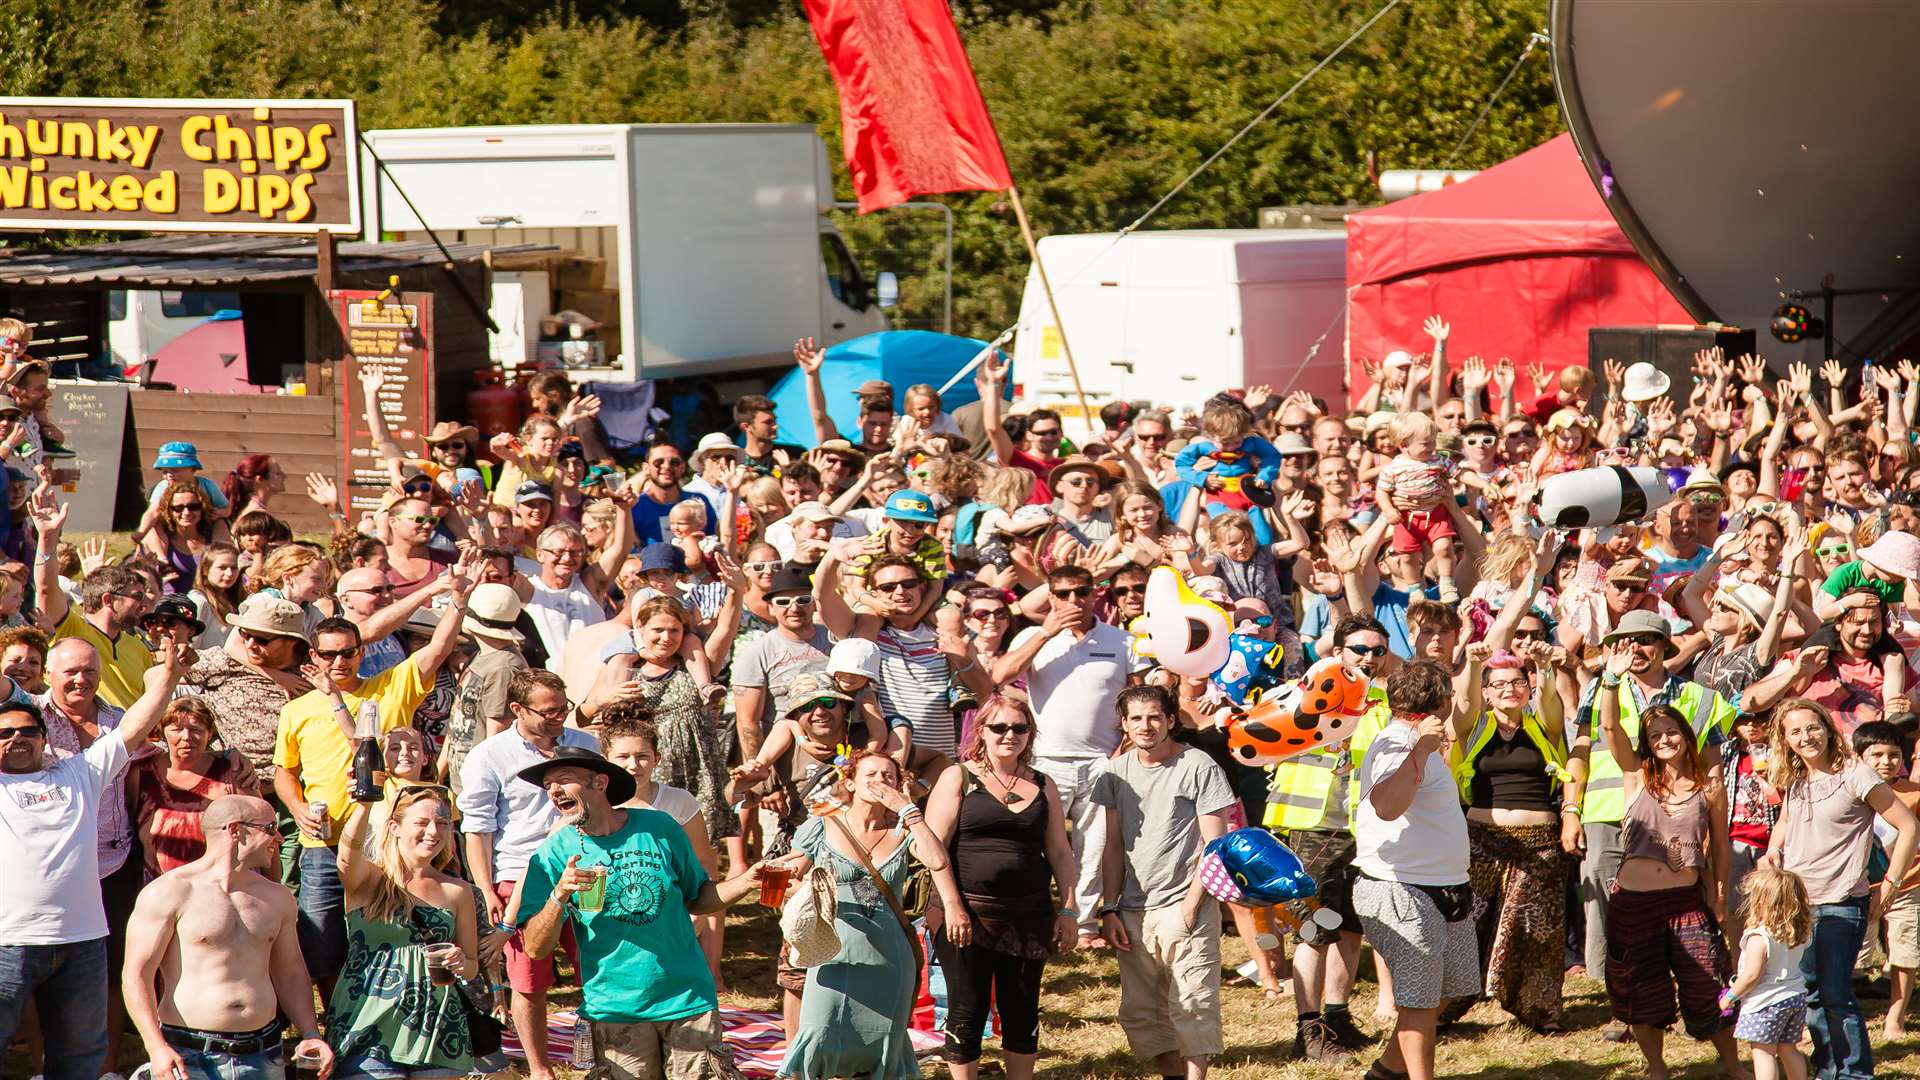 Chilled In a Field was voted one of the UK's best small festivals